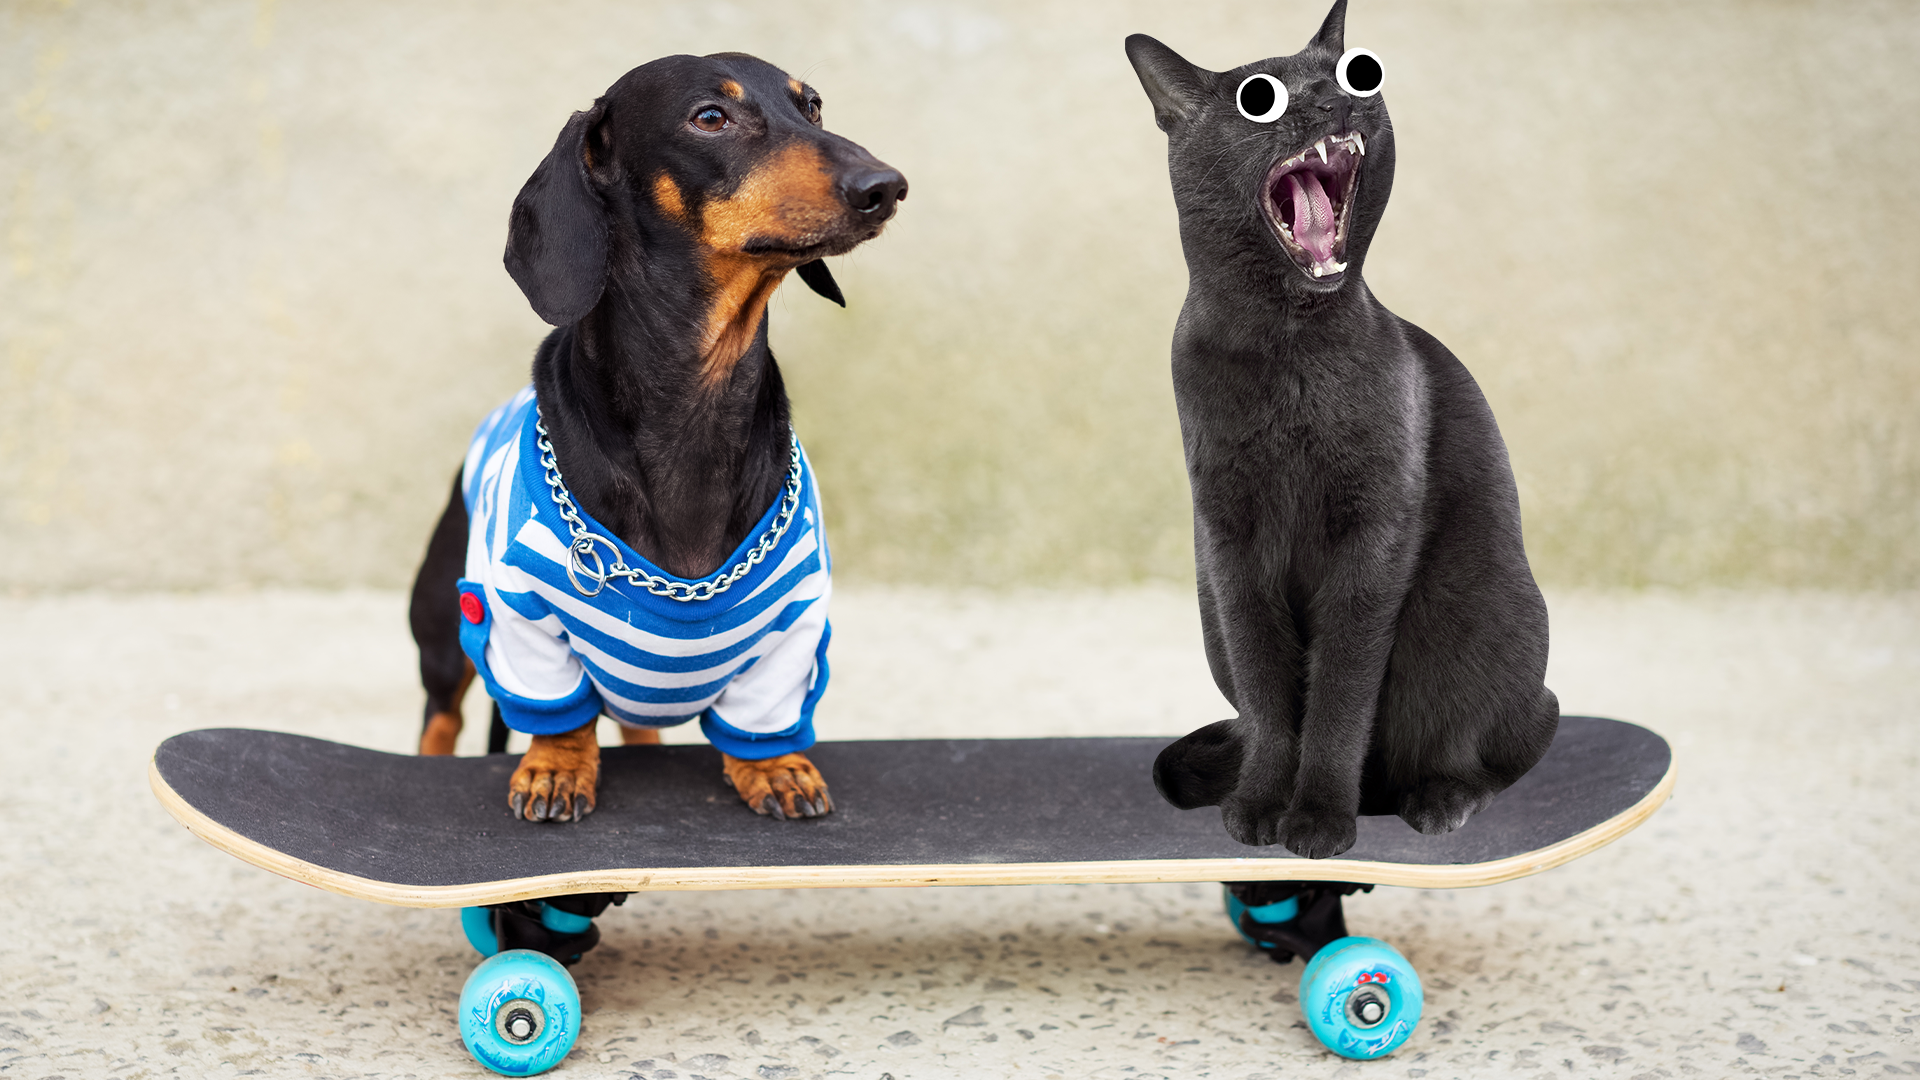 Dog on skateboard  with screaming cat